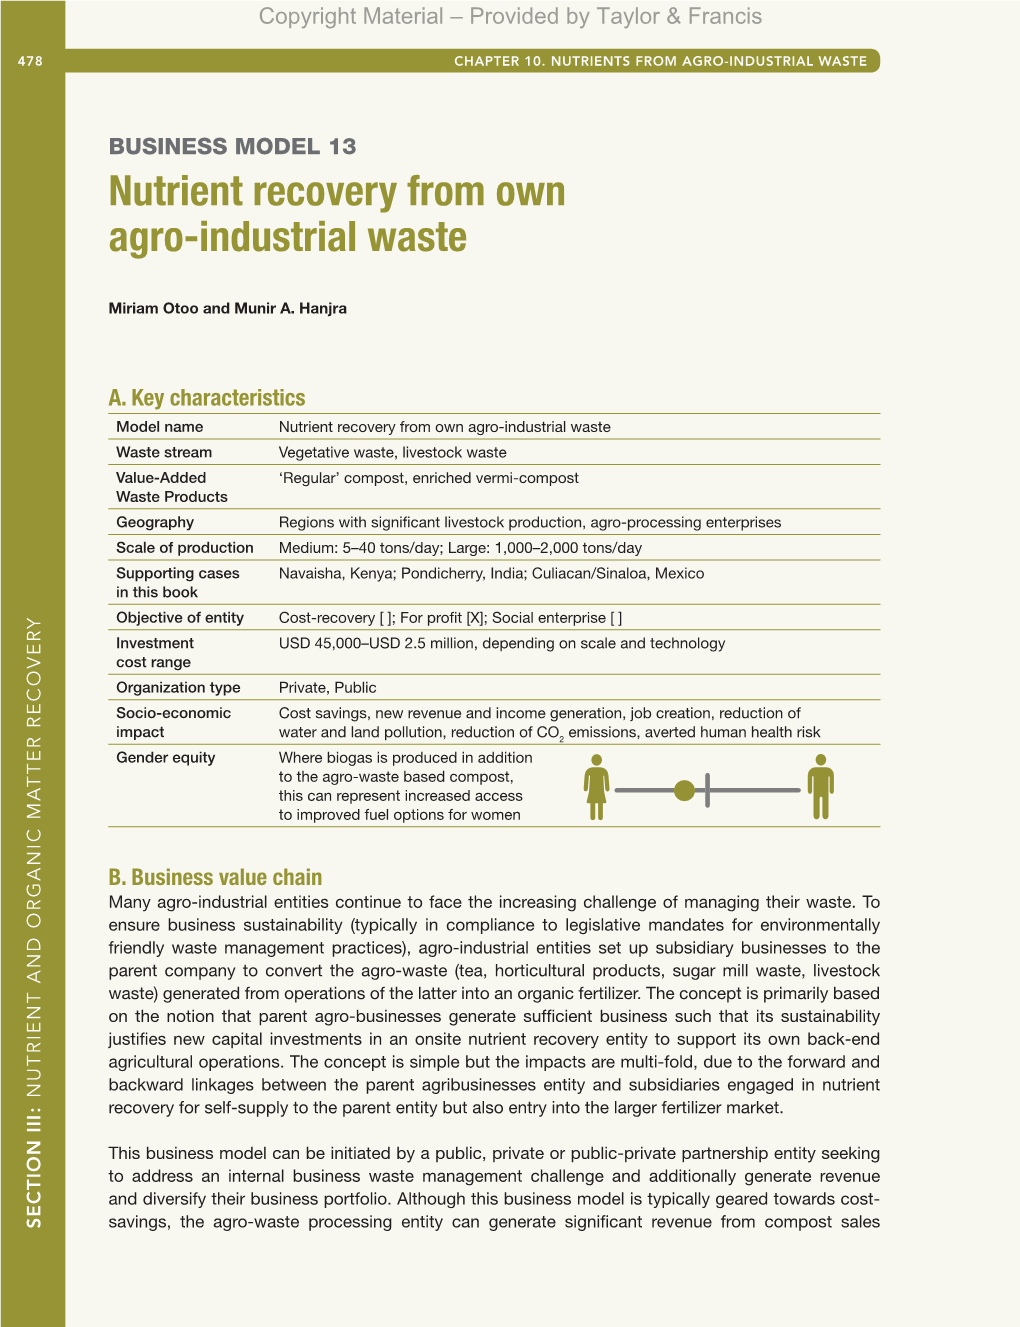 Nutrient Recovery from Own Agro-Industrial Waste